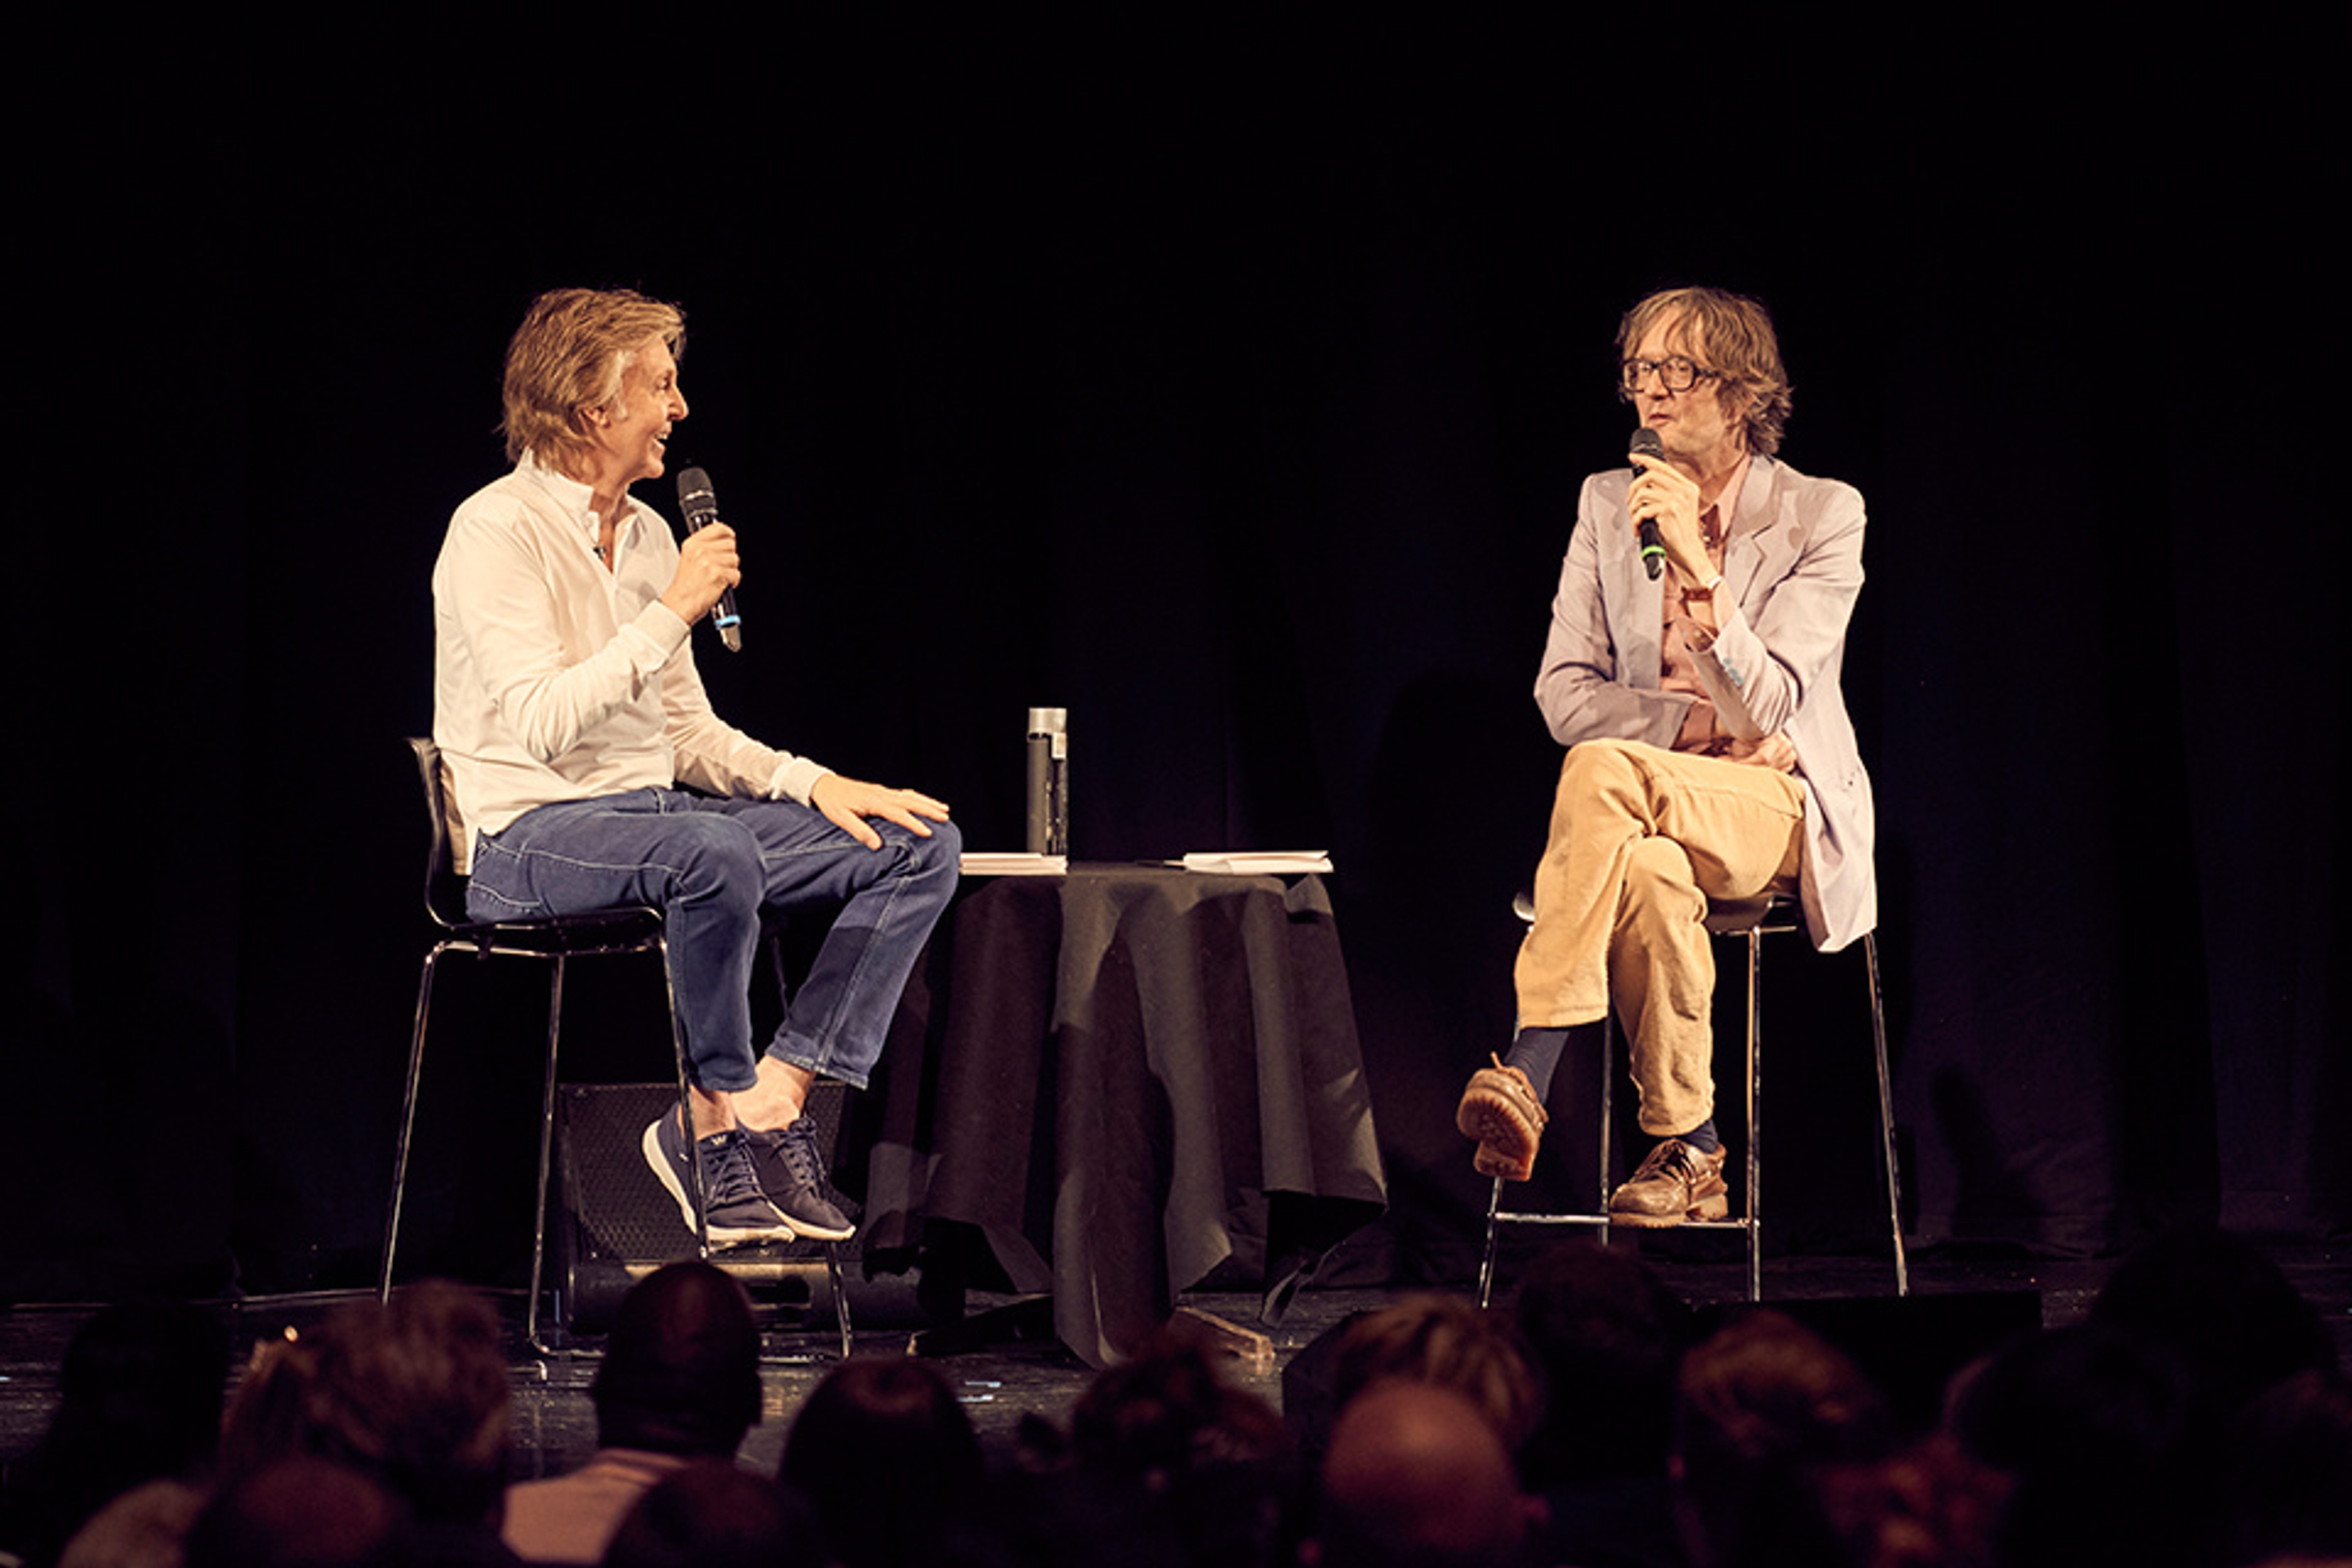 Watch Paul in 'Casual Conversation' with Jarvis Cocker